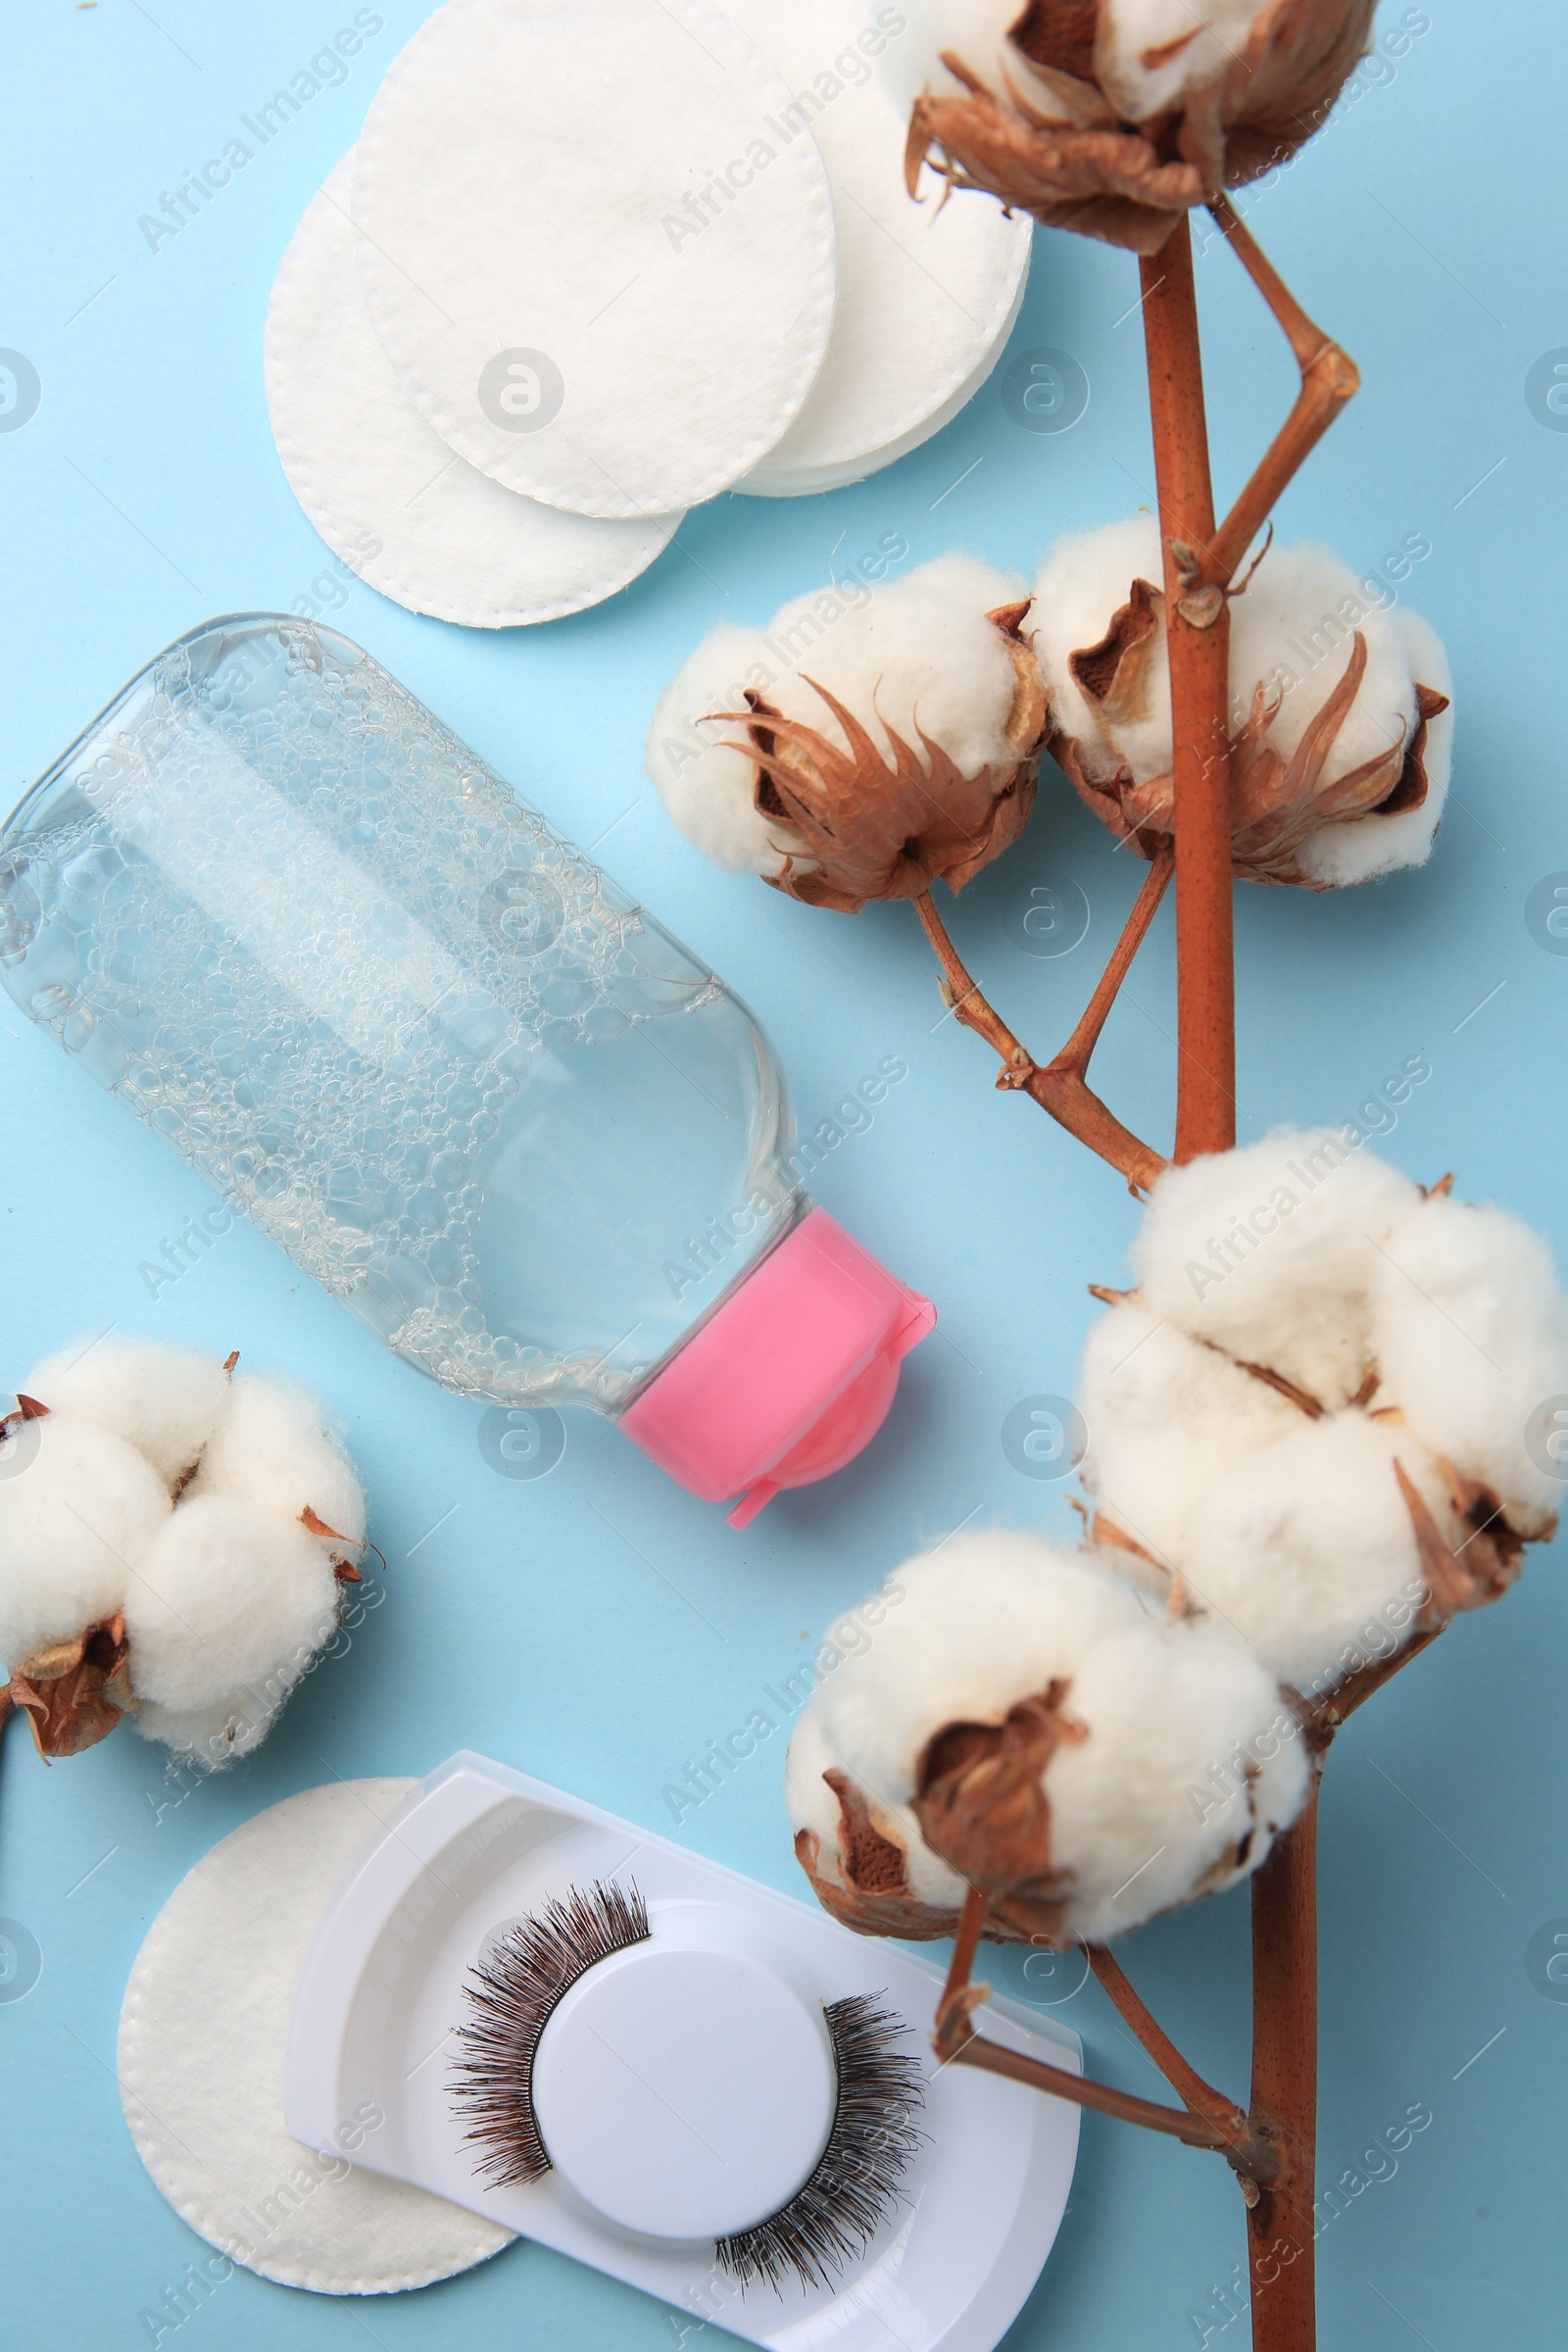 Photo of Bottle of makeup remover, cotton flowers, pads and false eyelashes on light blue background, flat lay